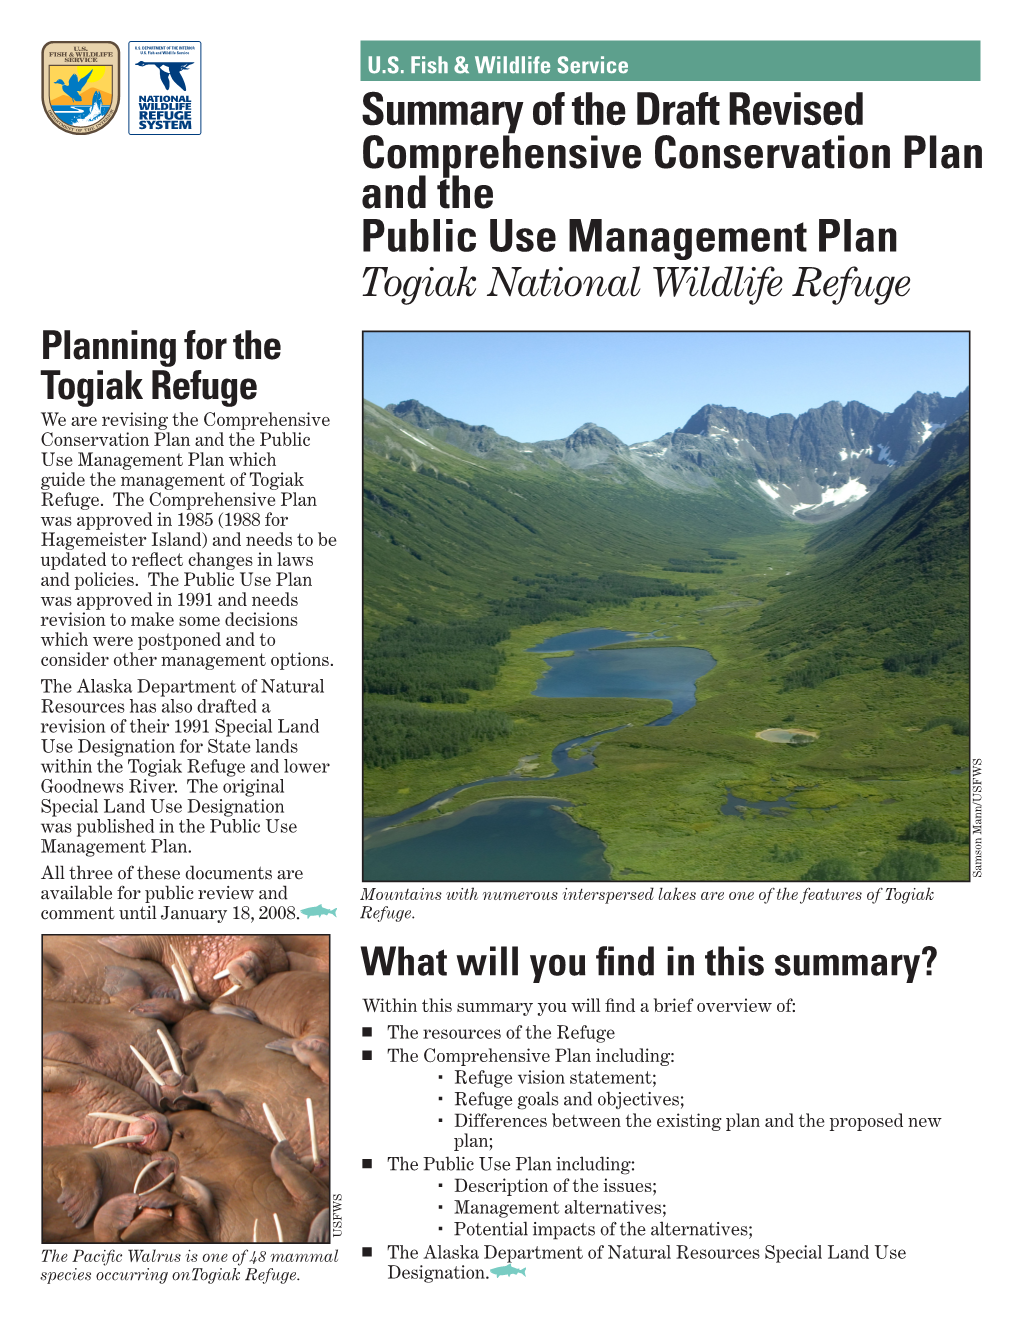 Summary of the Draft Revised Comprehensive Conservation Plan and the Public Use Management Plan, Togiak National Wildlife Refuge